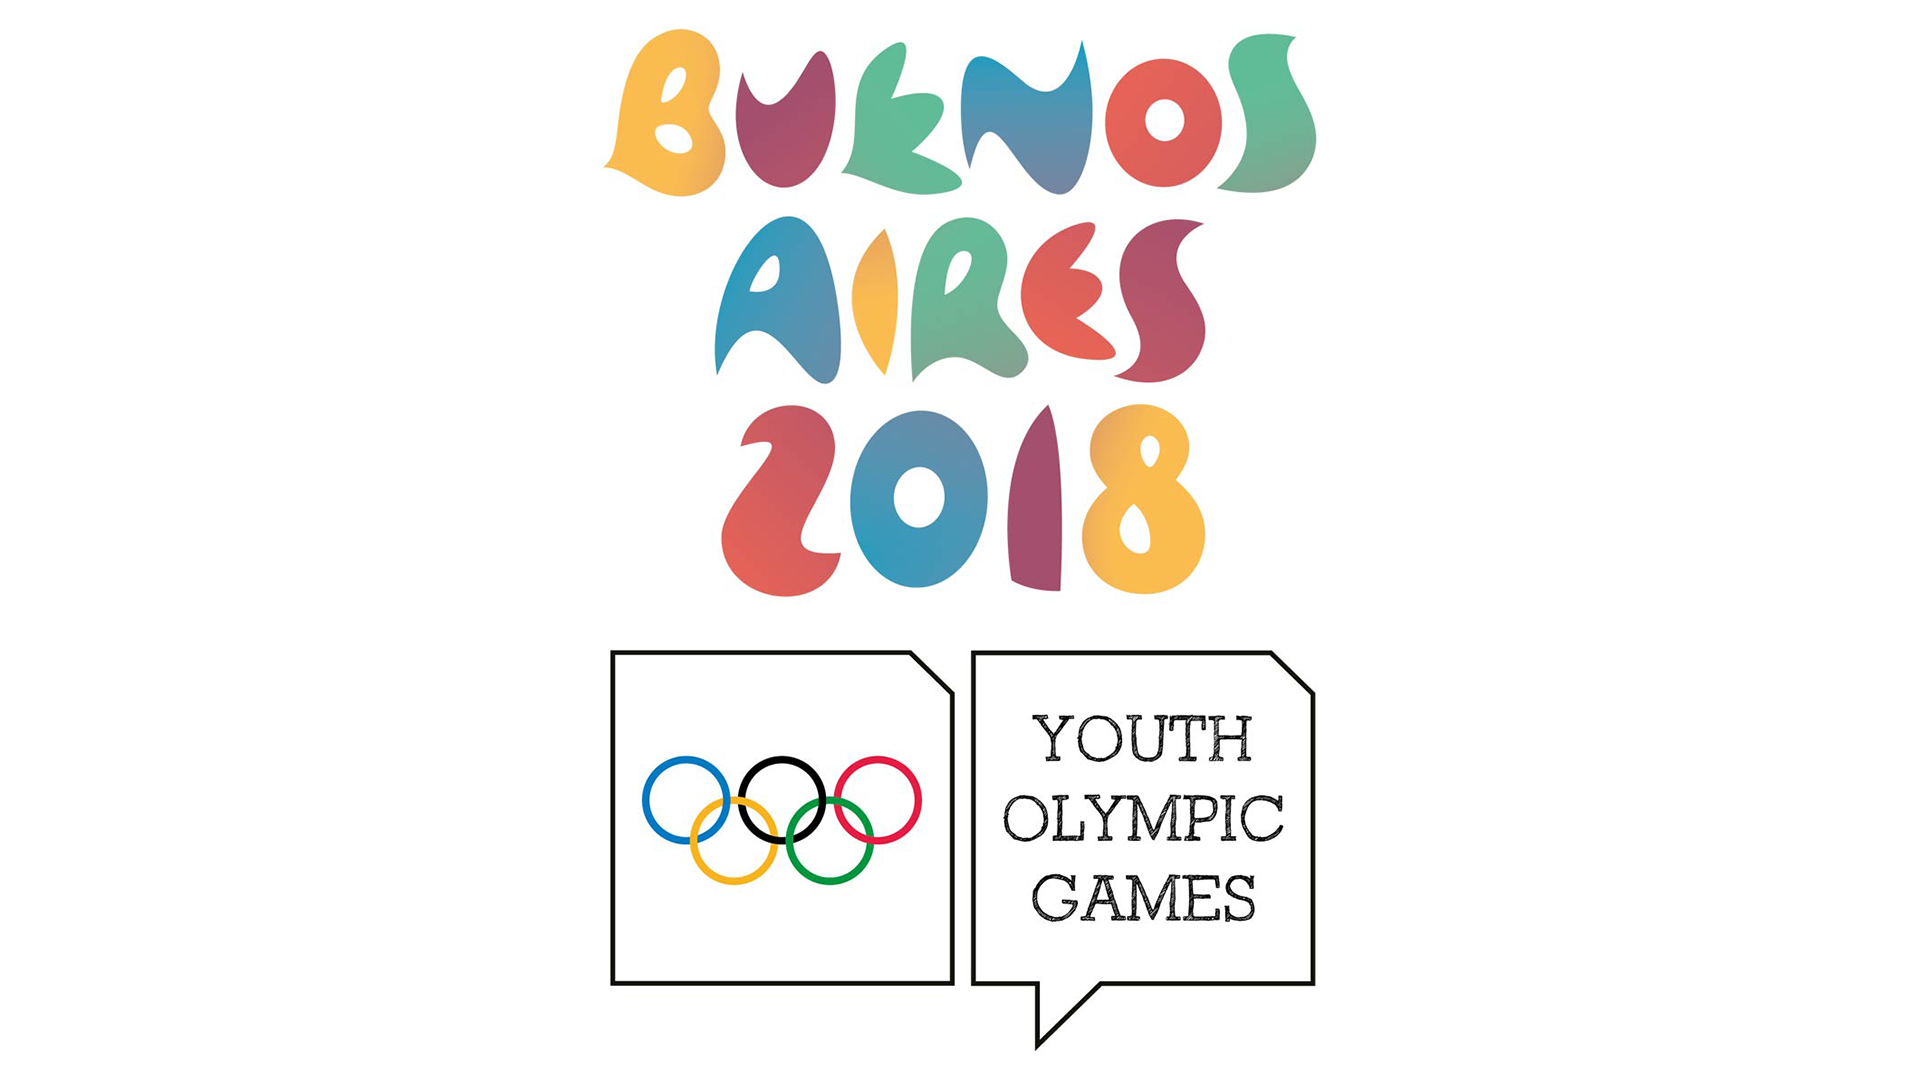 Youth Olympic Games will have a Unique Start